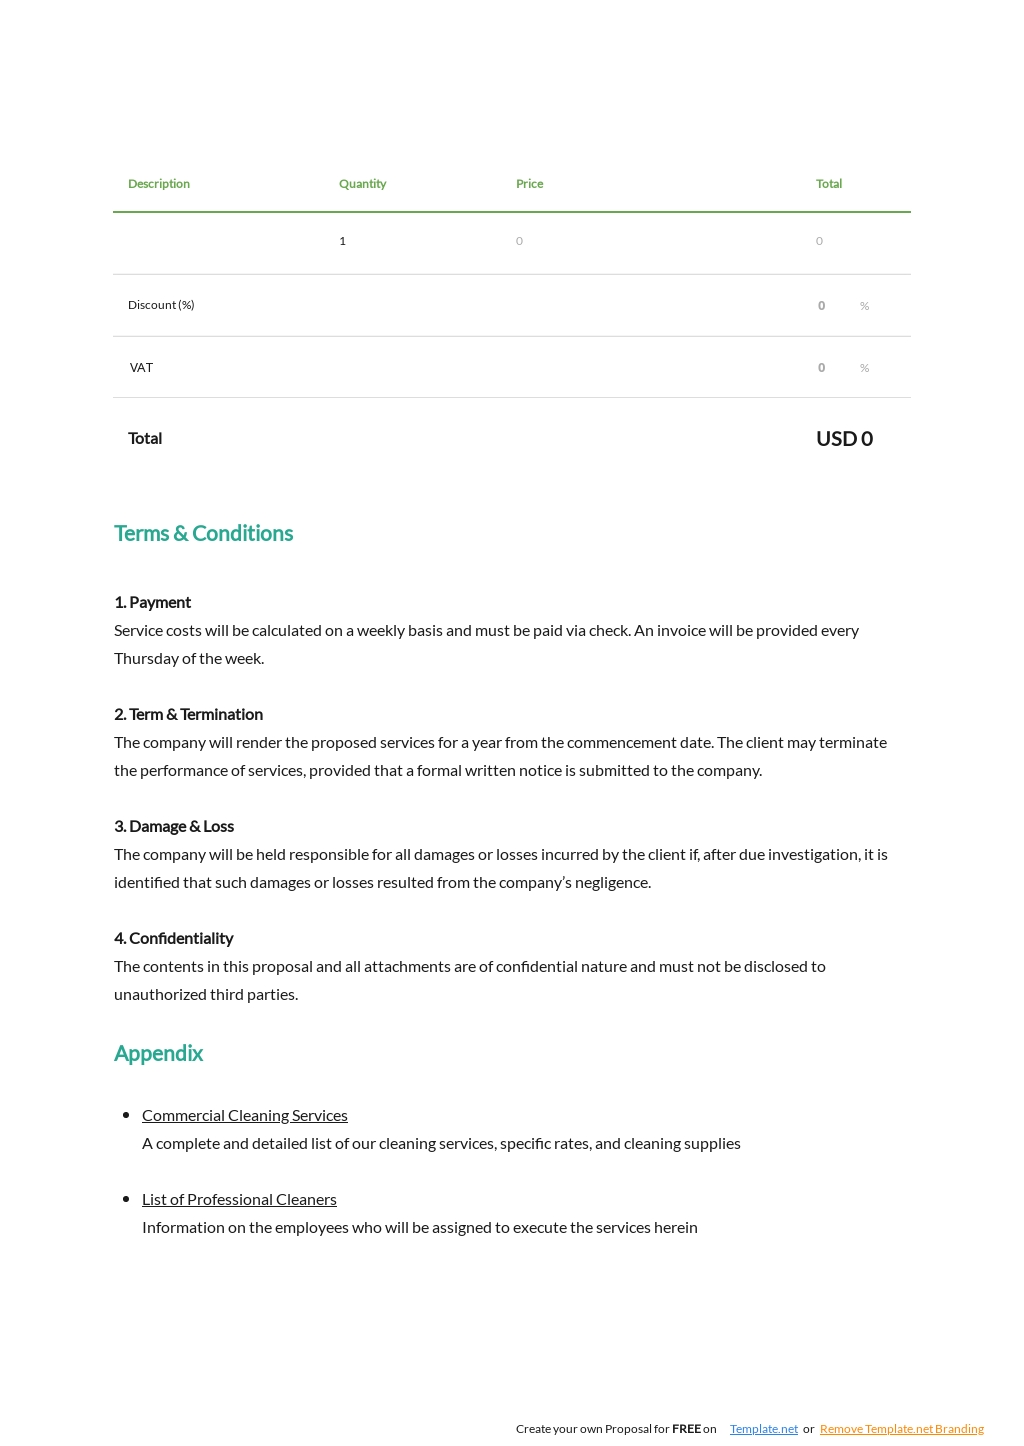 Sample Cleaning Business Proposal Template 2.jpe